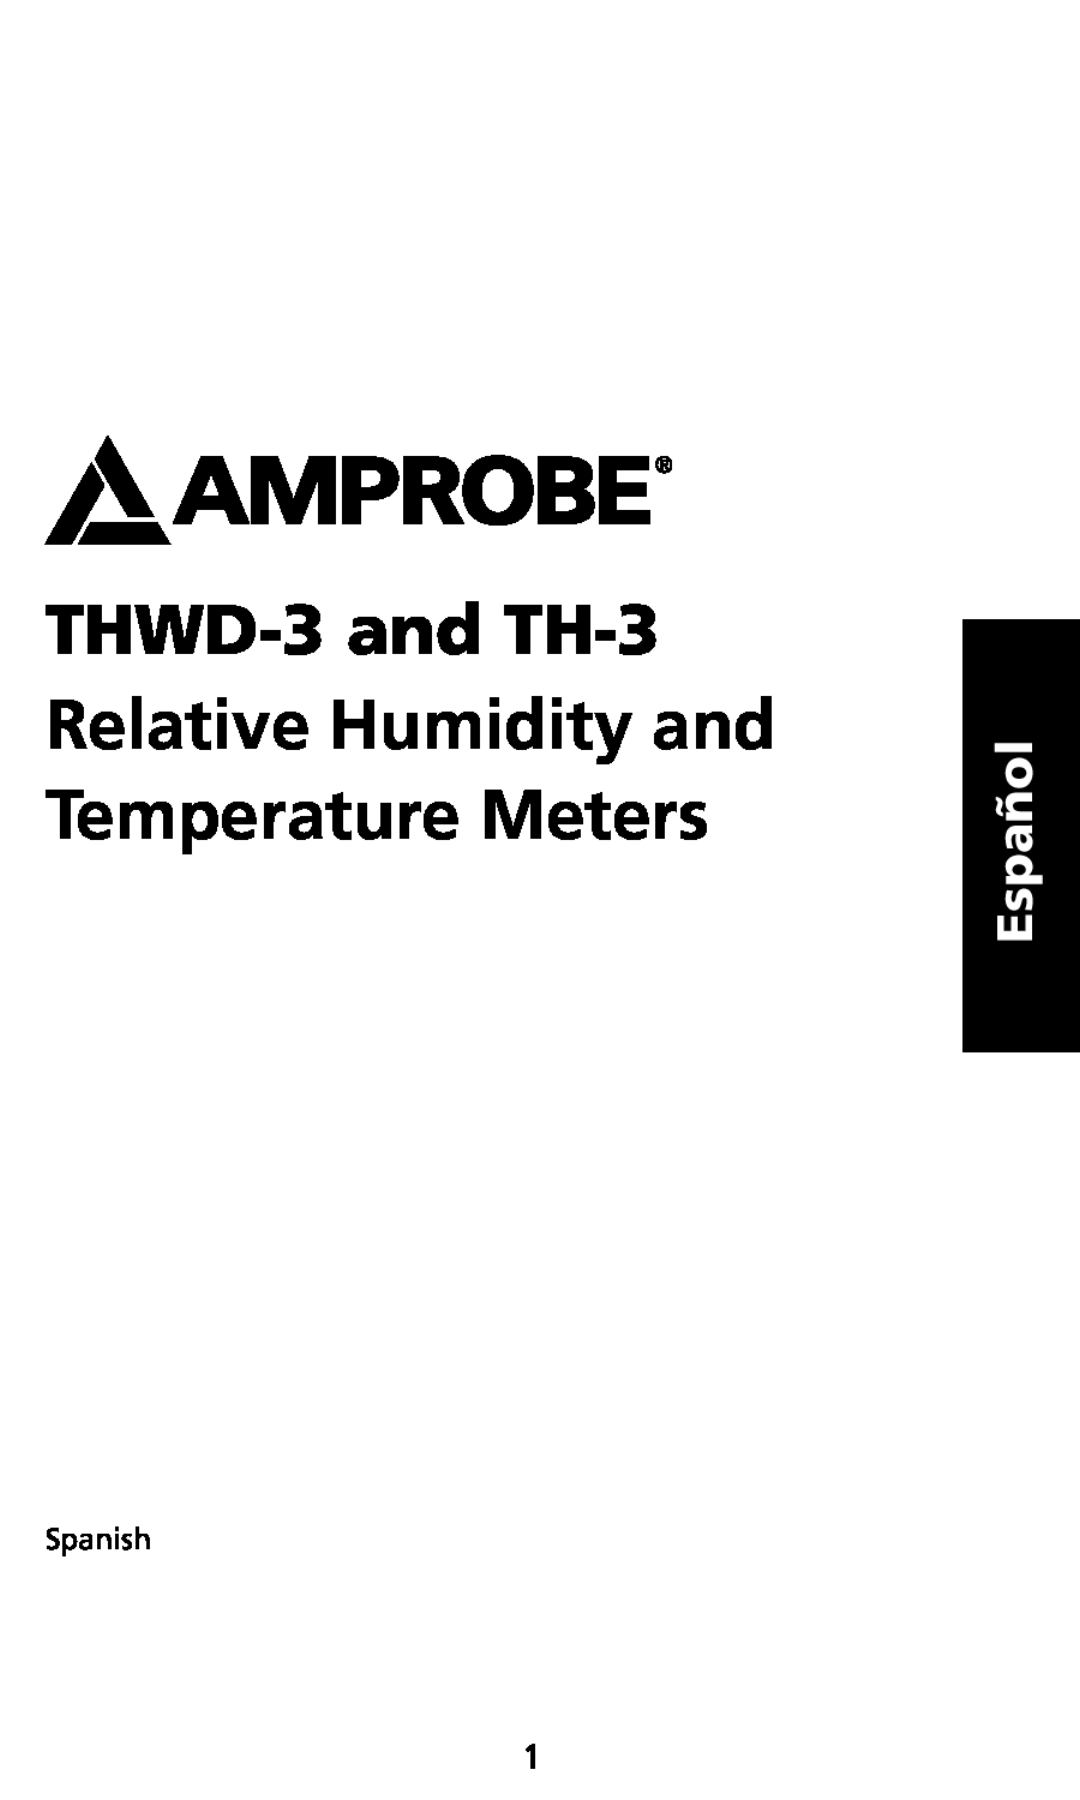 Ampro Corporation user manual Español, THWD-3 and TH-3 Relative Humidity and Temperature Meters, Spanish 